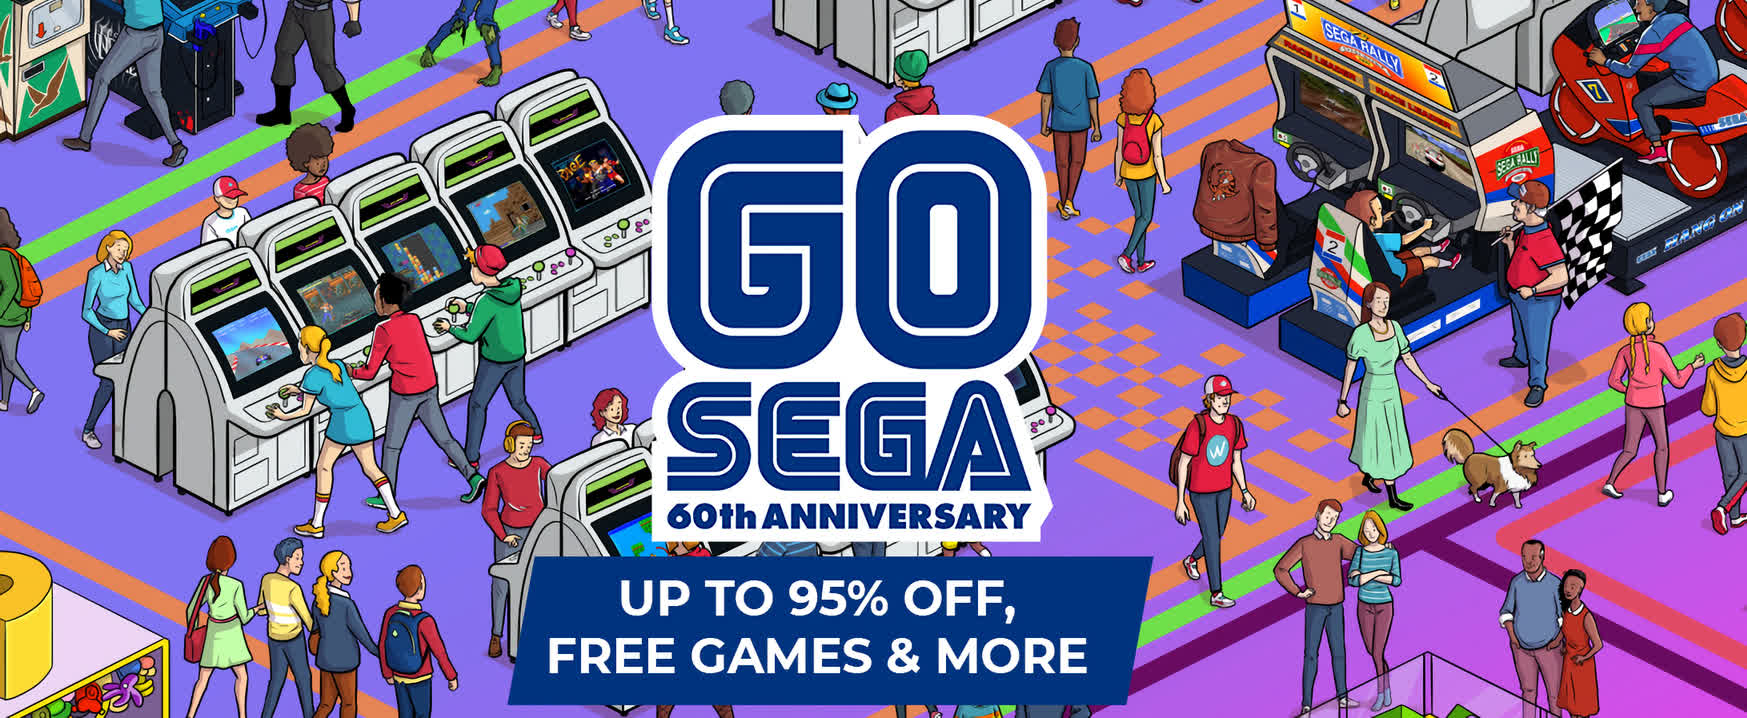 Sega celebrates 60th anniversary with deep discounts and free games on Steam